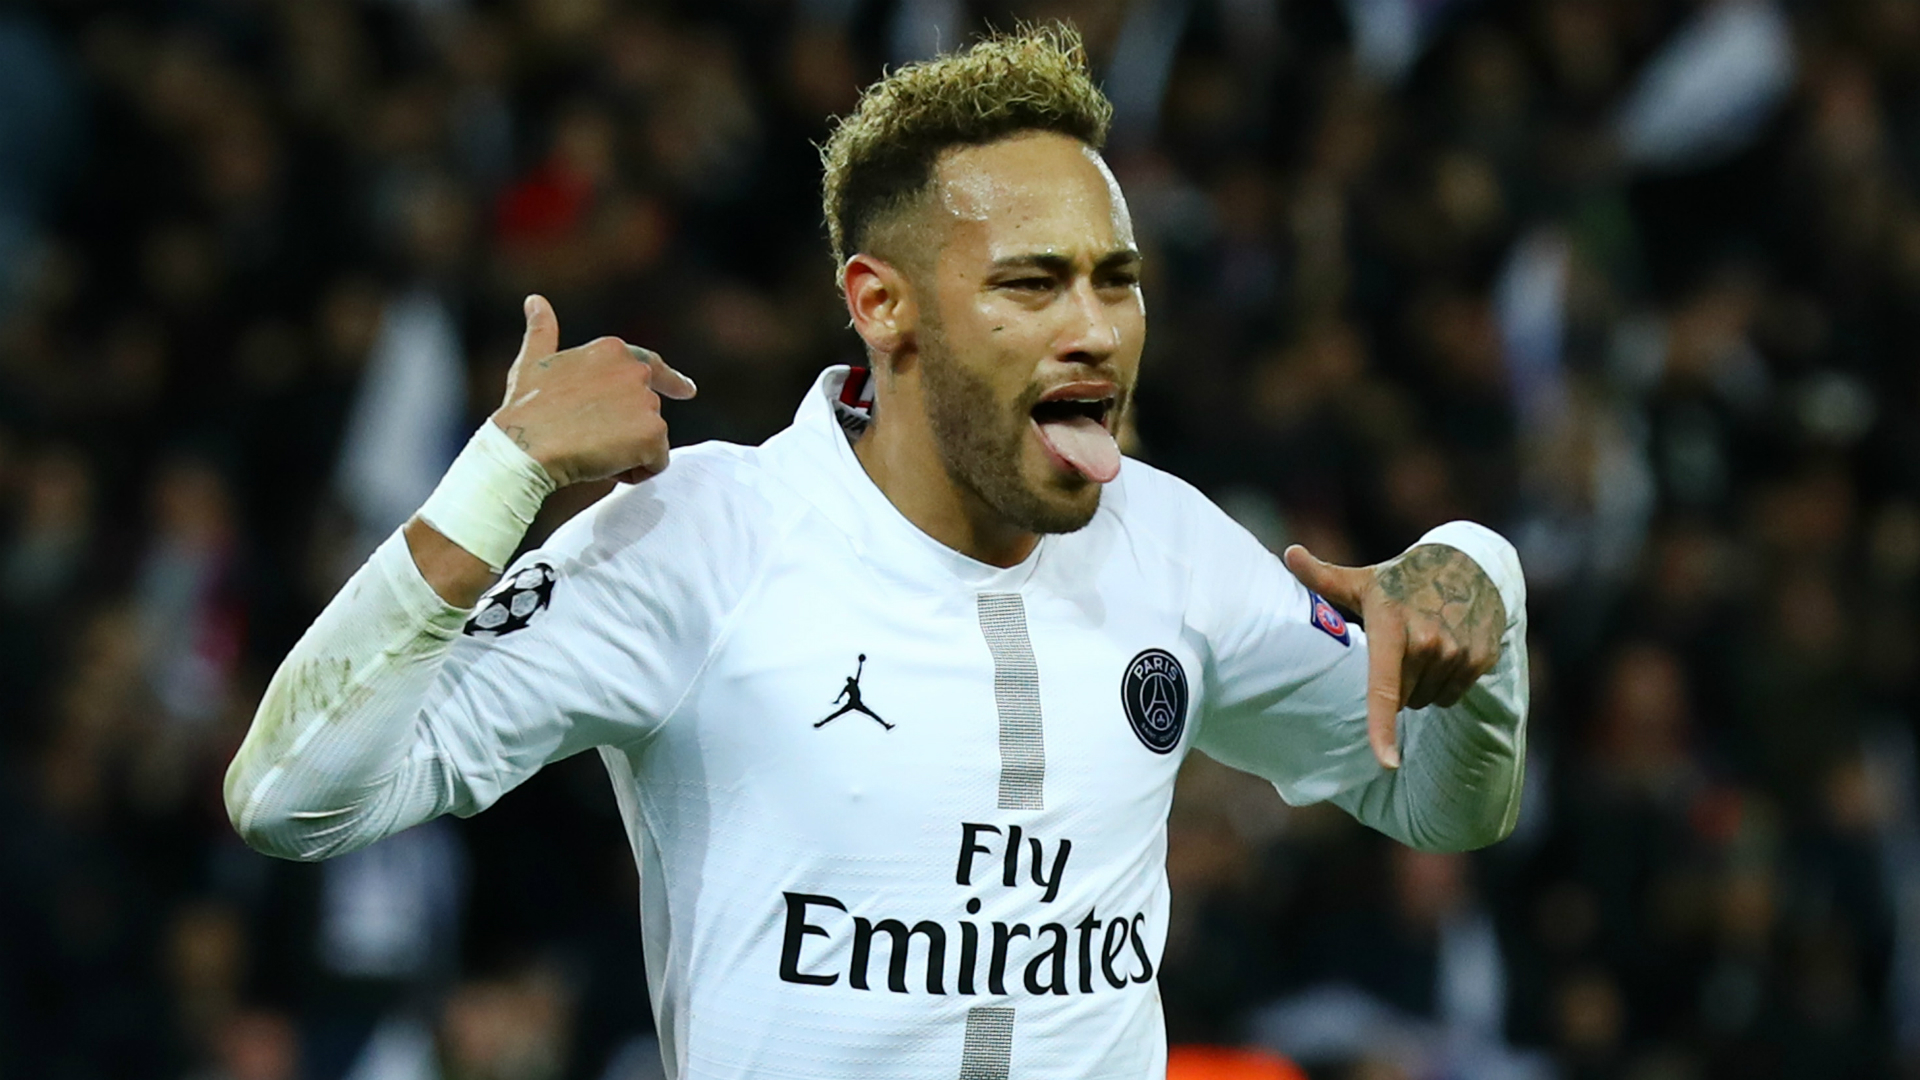 Tottenham have to contend with Lionel Messi as they aim to progress in the Champions League, while PSG's Neymar will be eyeing a record.